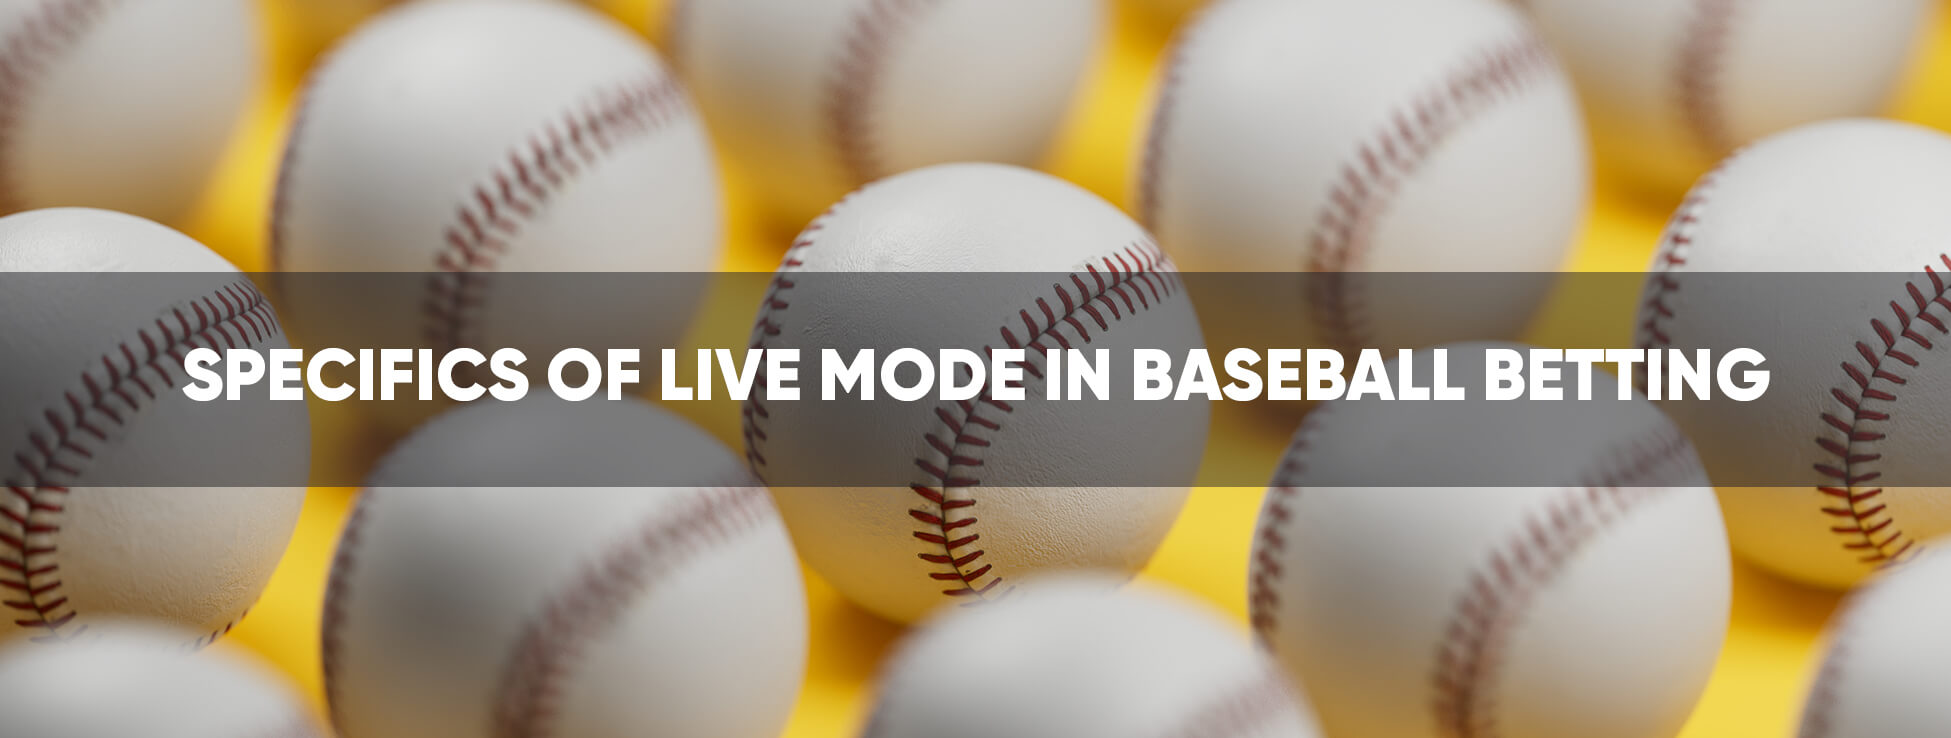 Specifics of LIVE mode in baseball betting